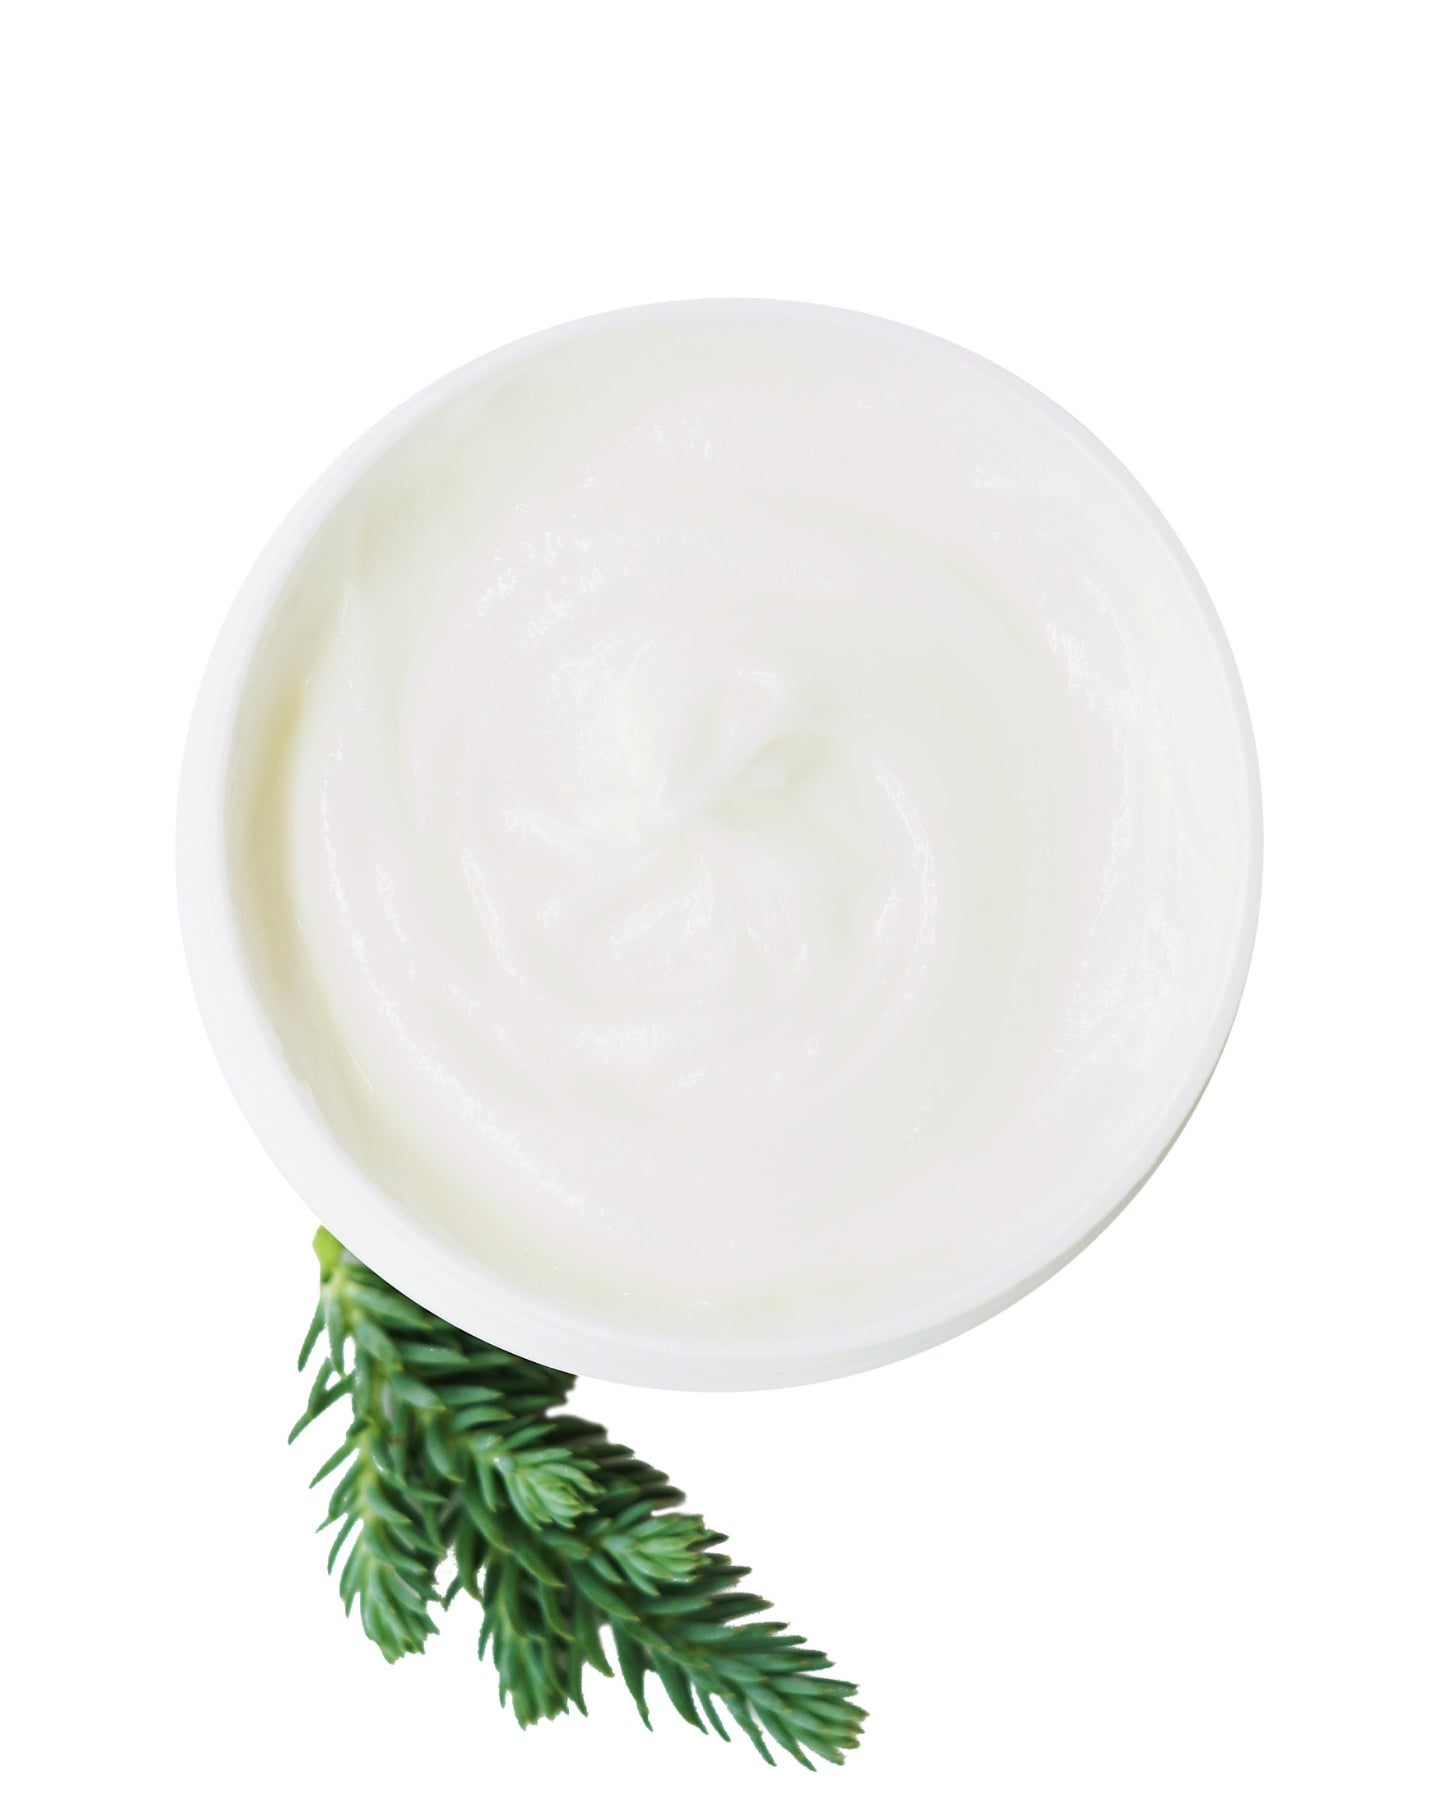 A close-up shot of the Unscented Nourish Conditioner, enlarged to show texture.